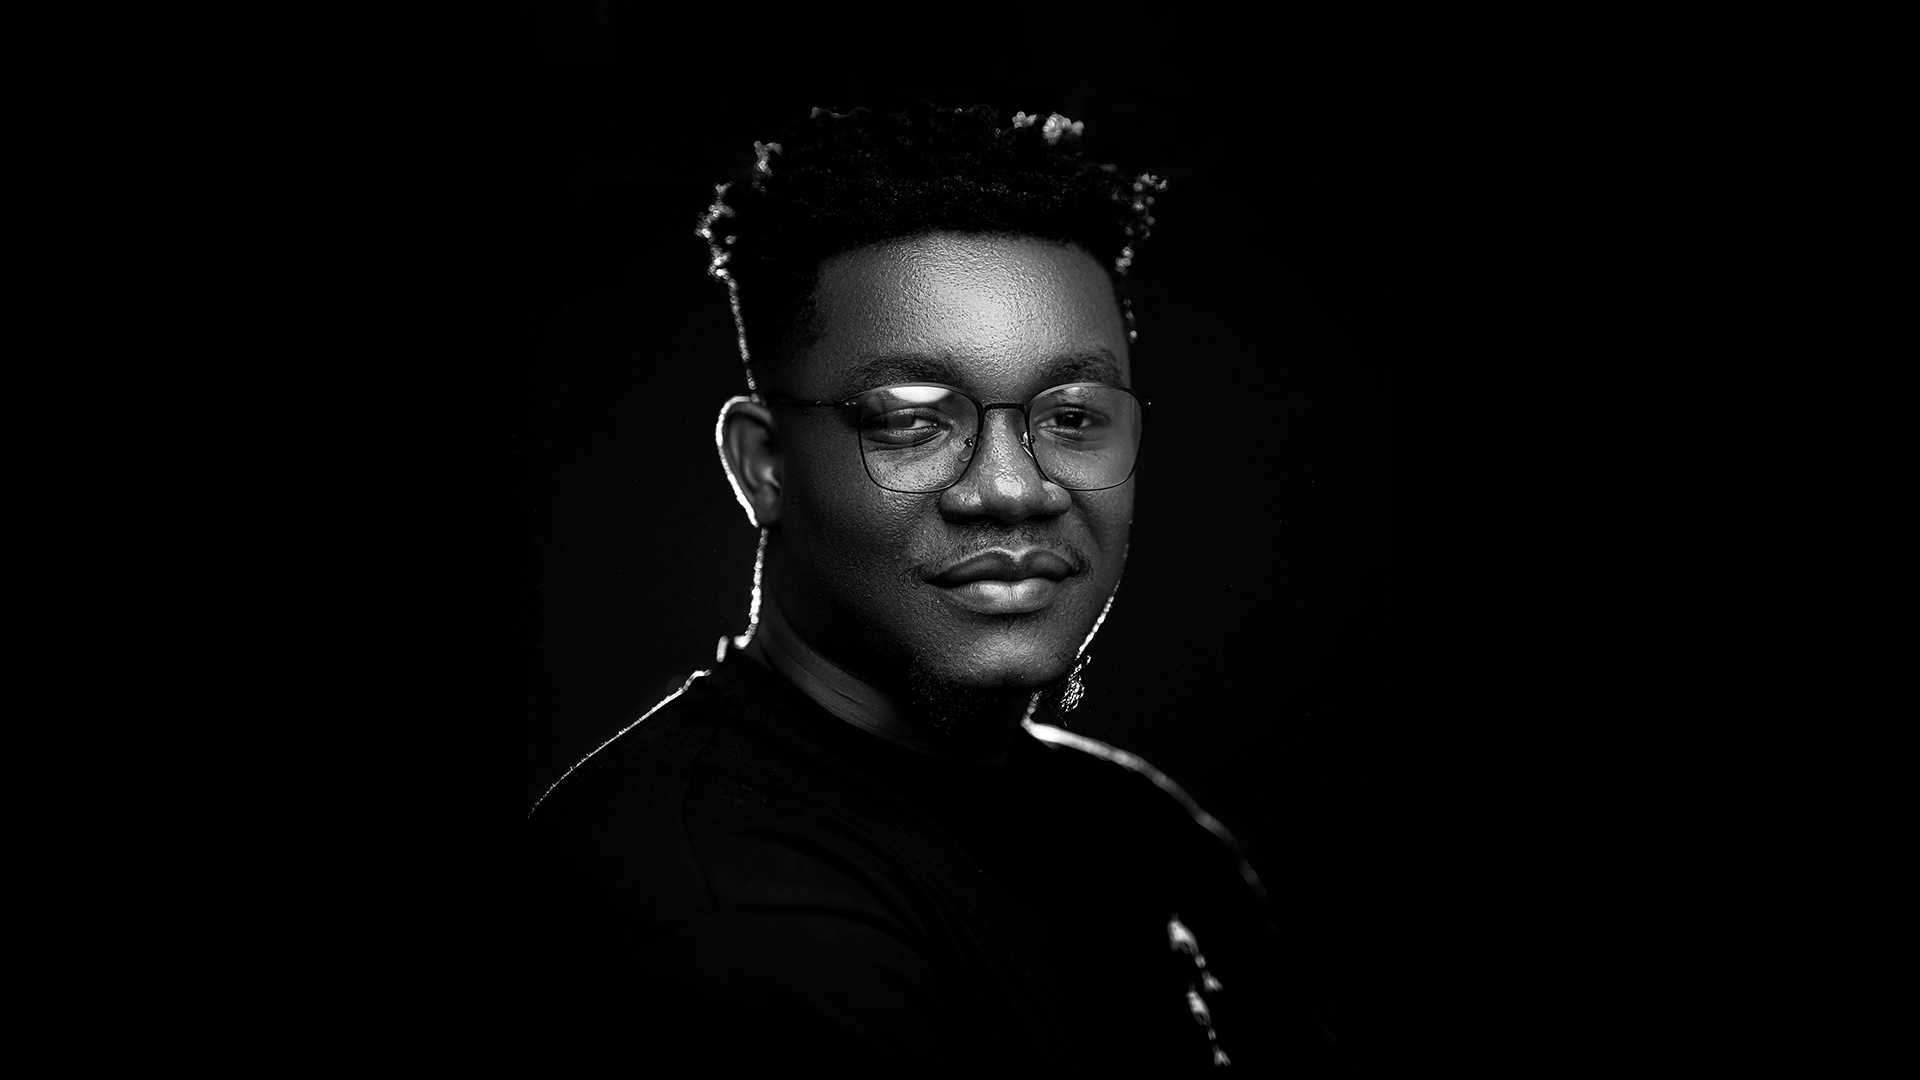 Hello, I’m <span style="color: #e22447;"><strong>Michael Eneji</strong></span>, a Product Designer and Content Creator Based in Abuja, Nigeria.